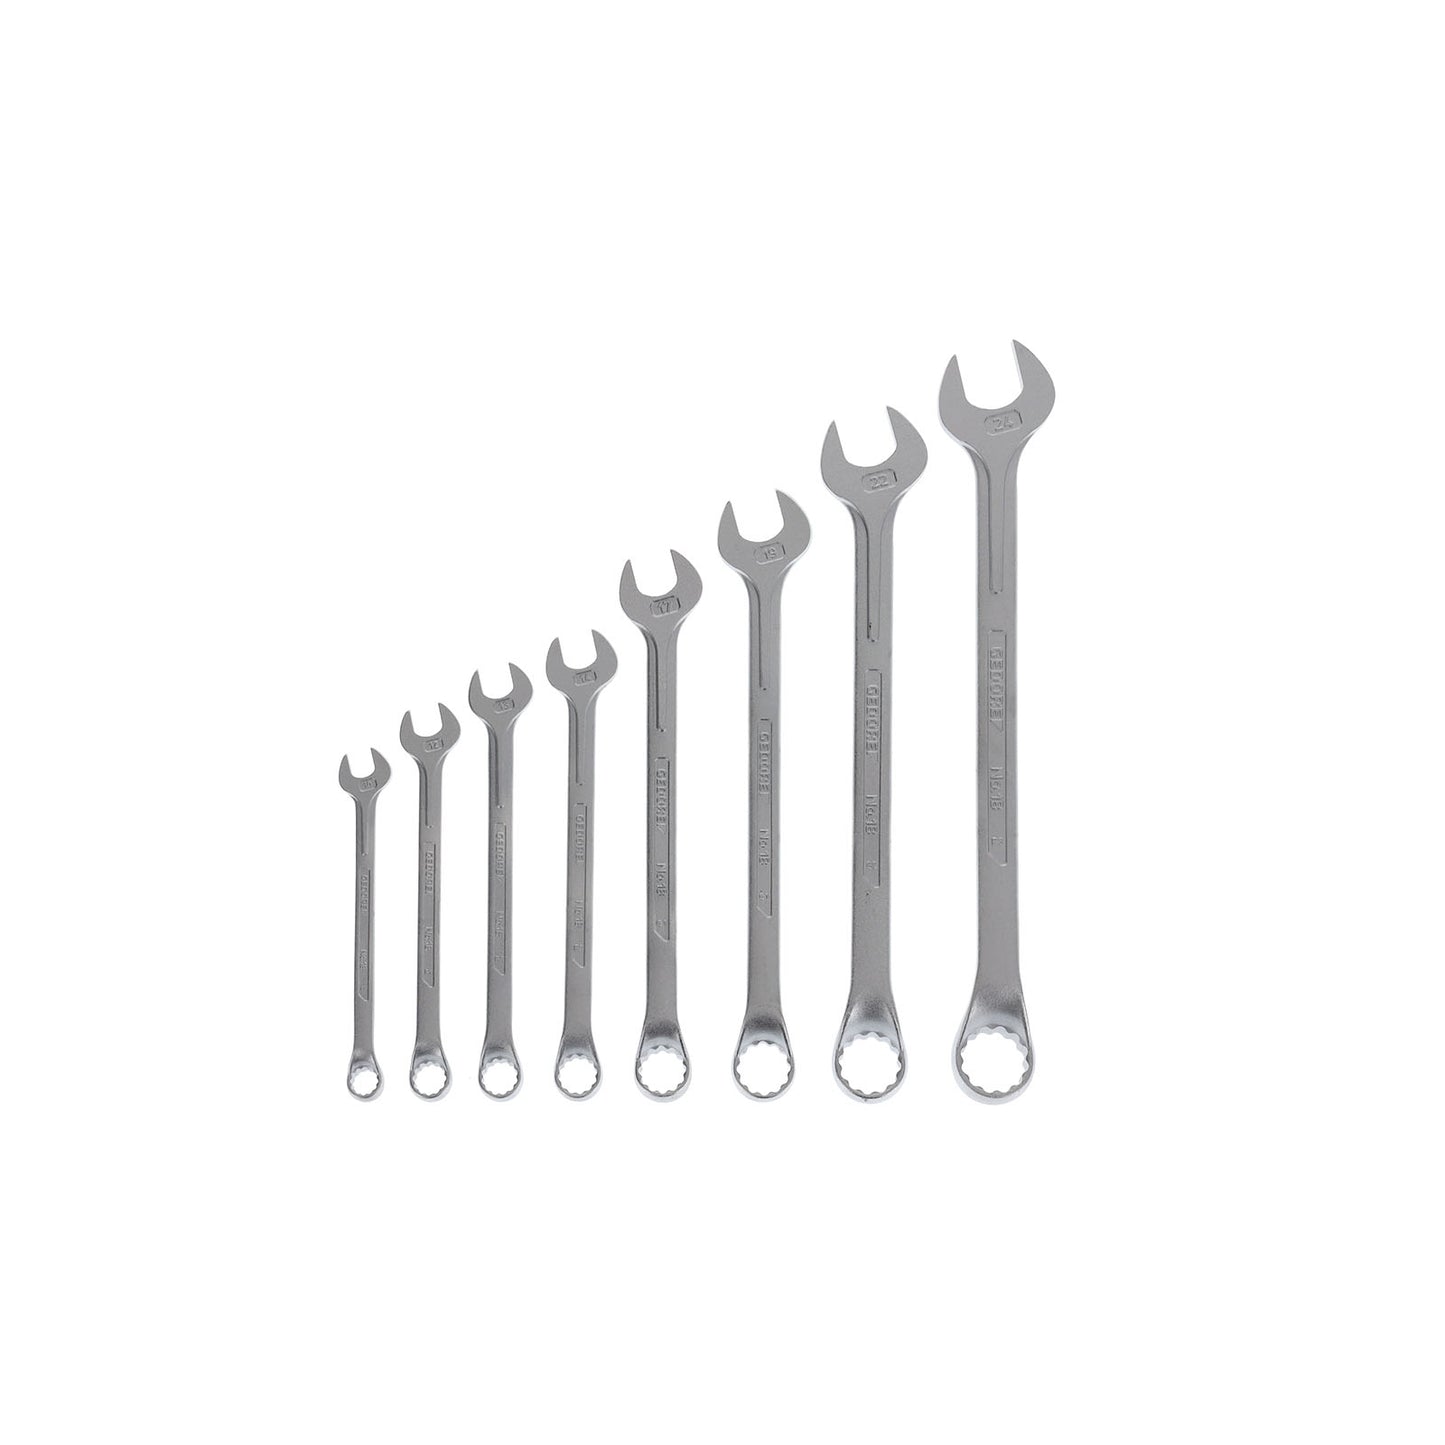 GEDORE 1 B-08 - Set of 8 Offset Combination Wrenches (6011870)